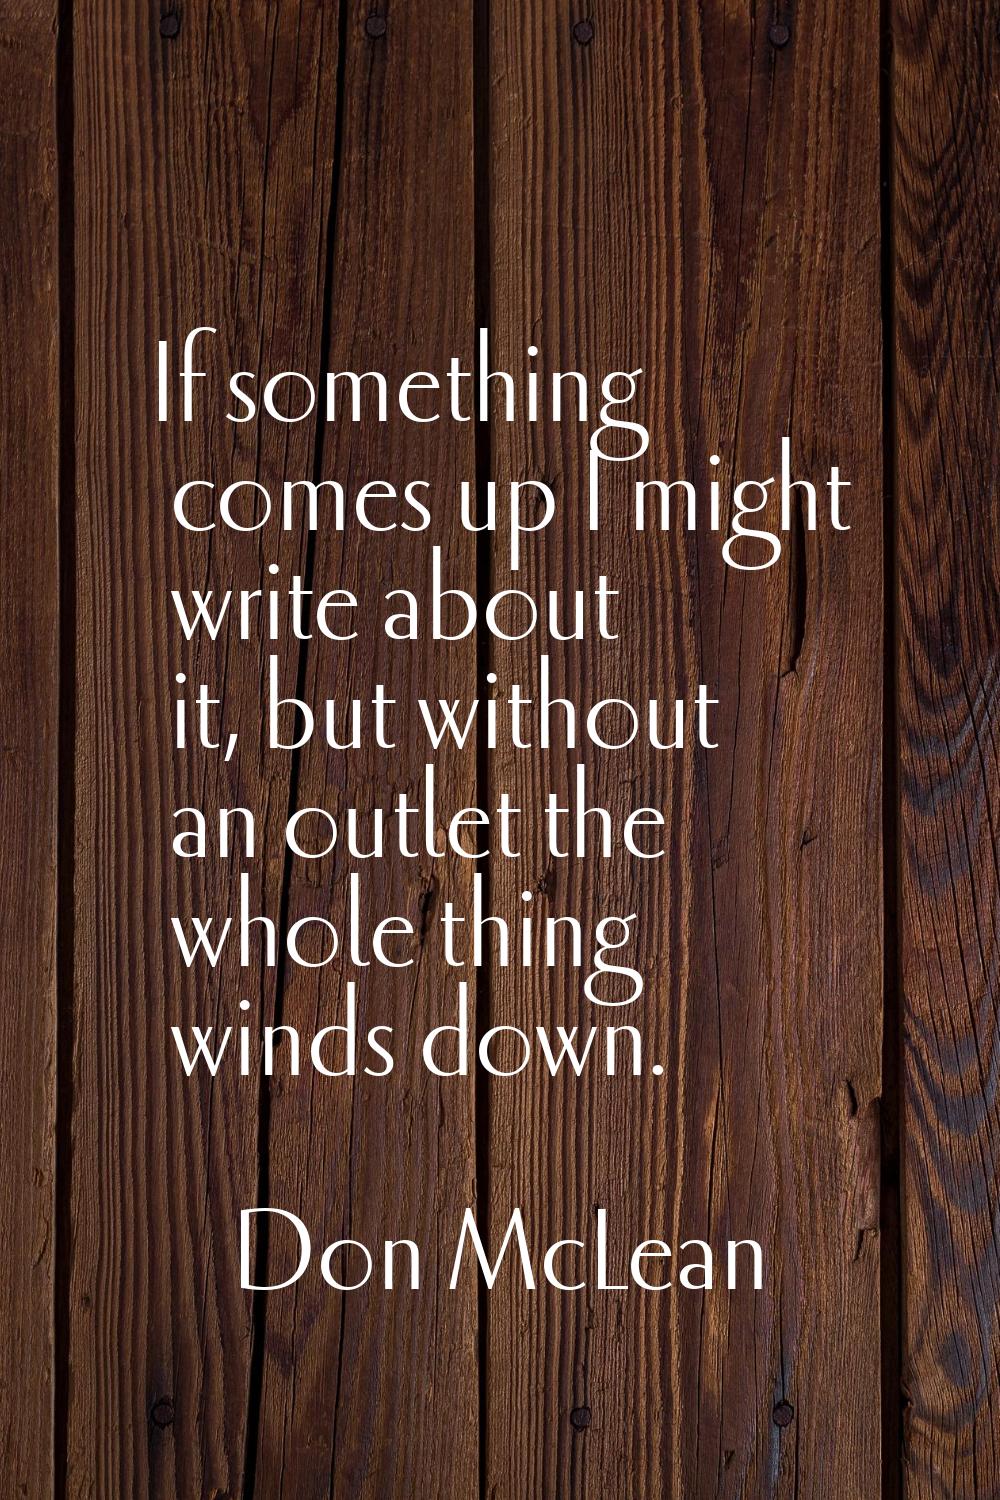 If something comes up I might write about it, but without an outlet the whole thing winds down.